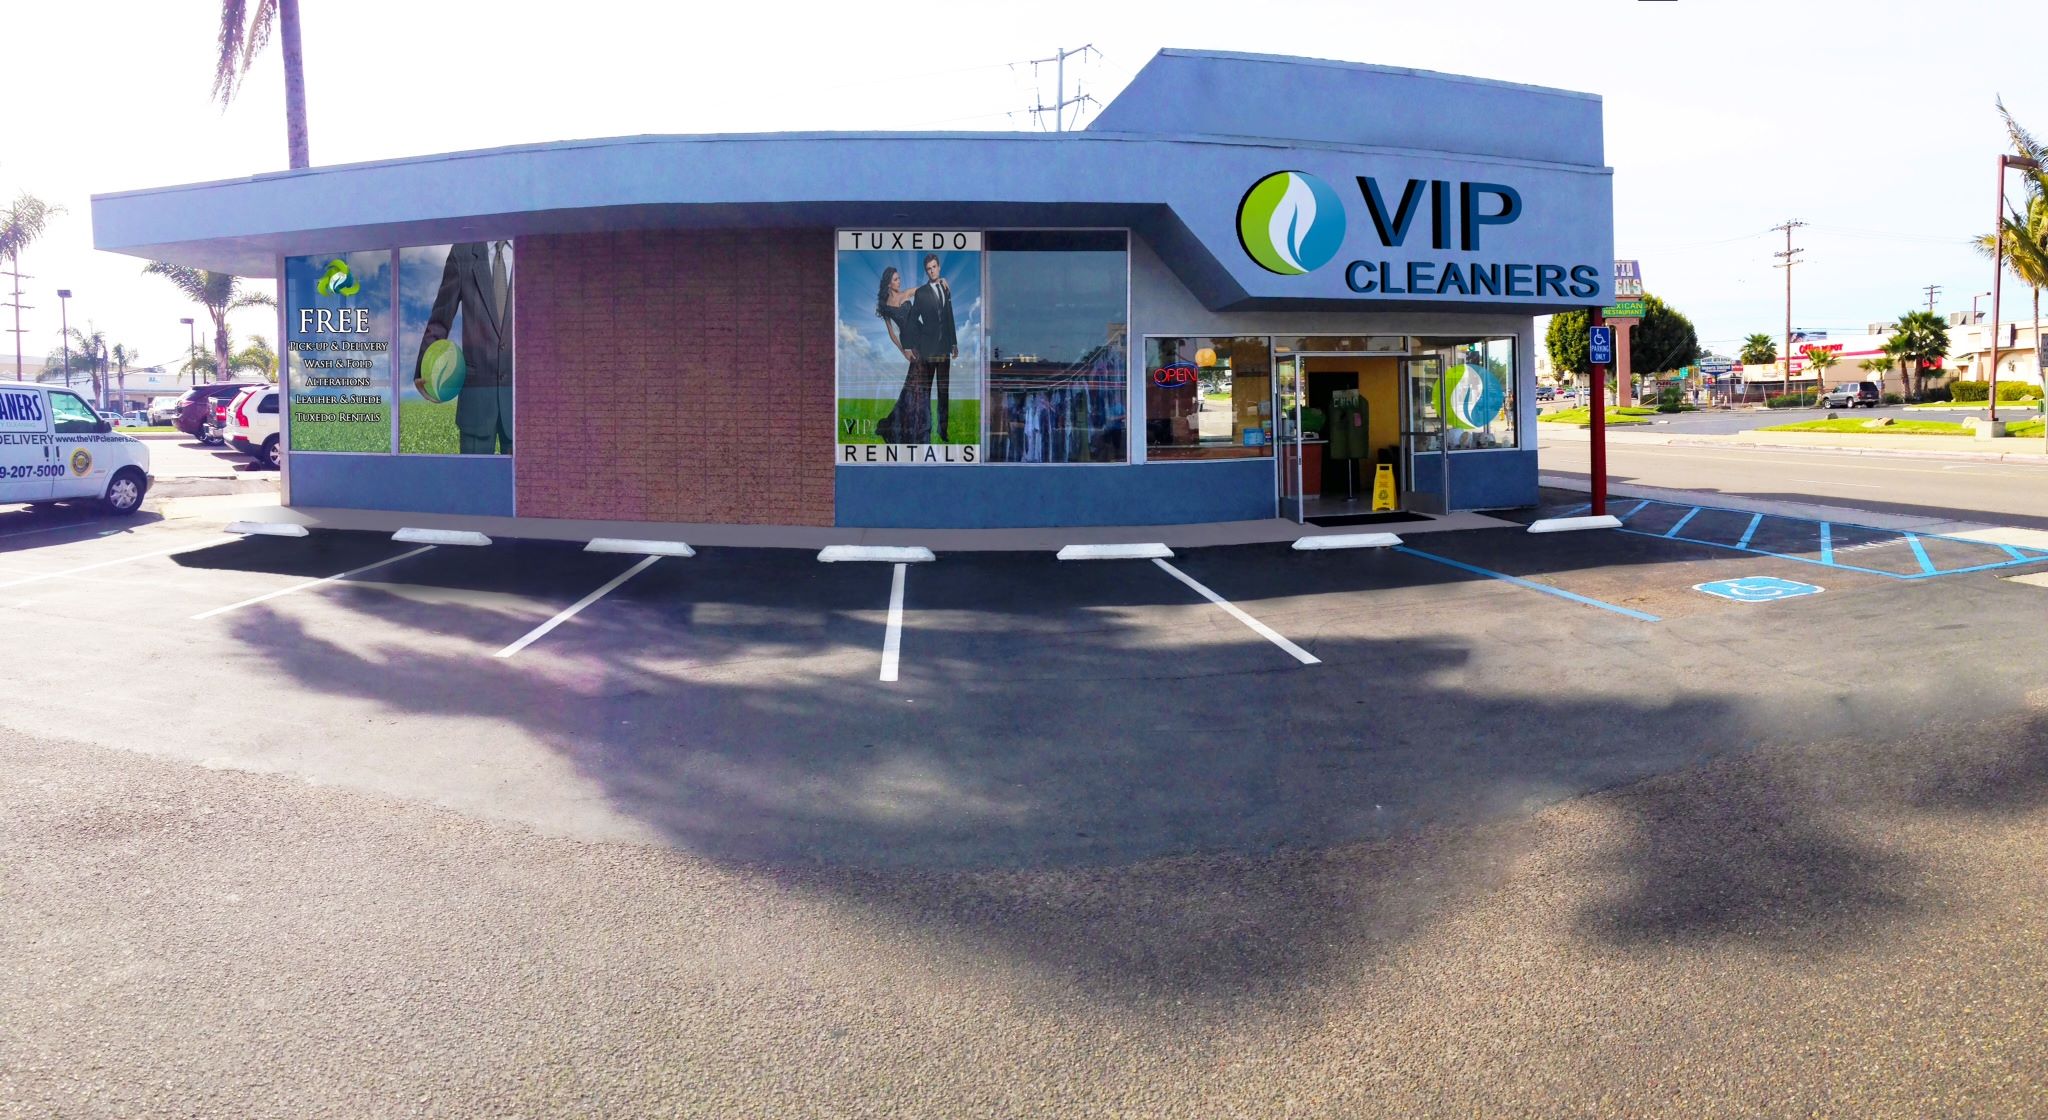 VIP cleaners Store